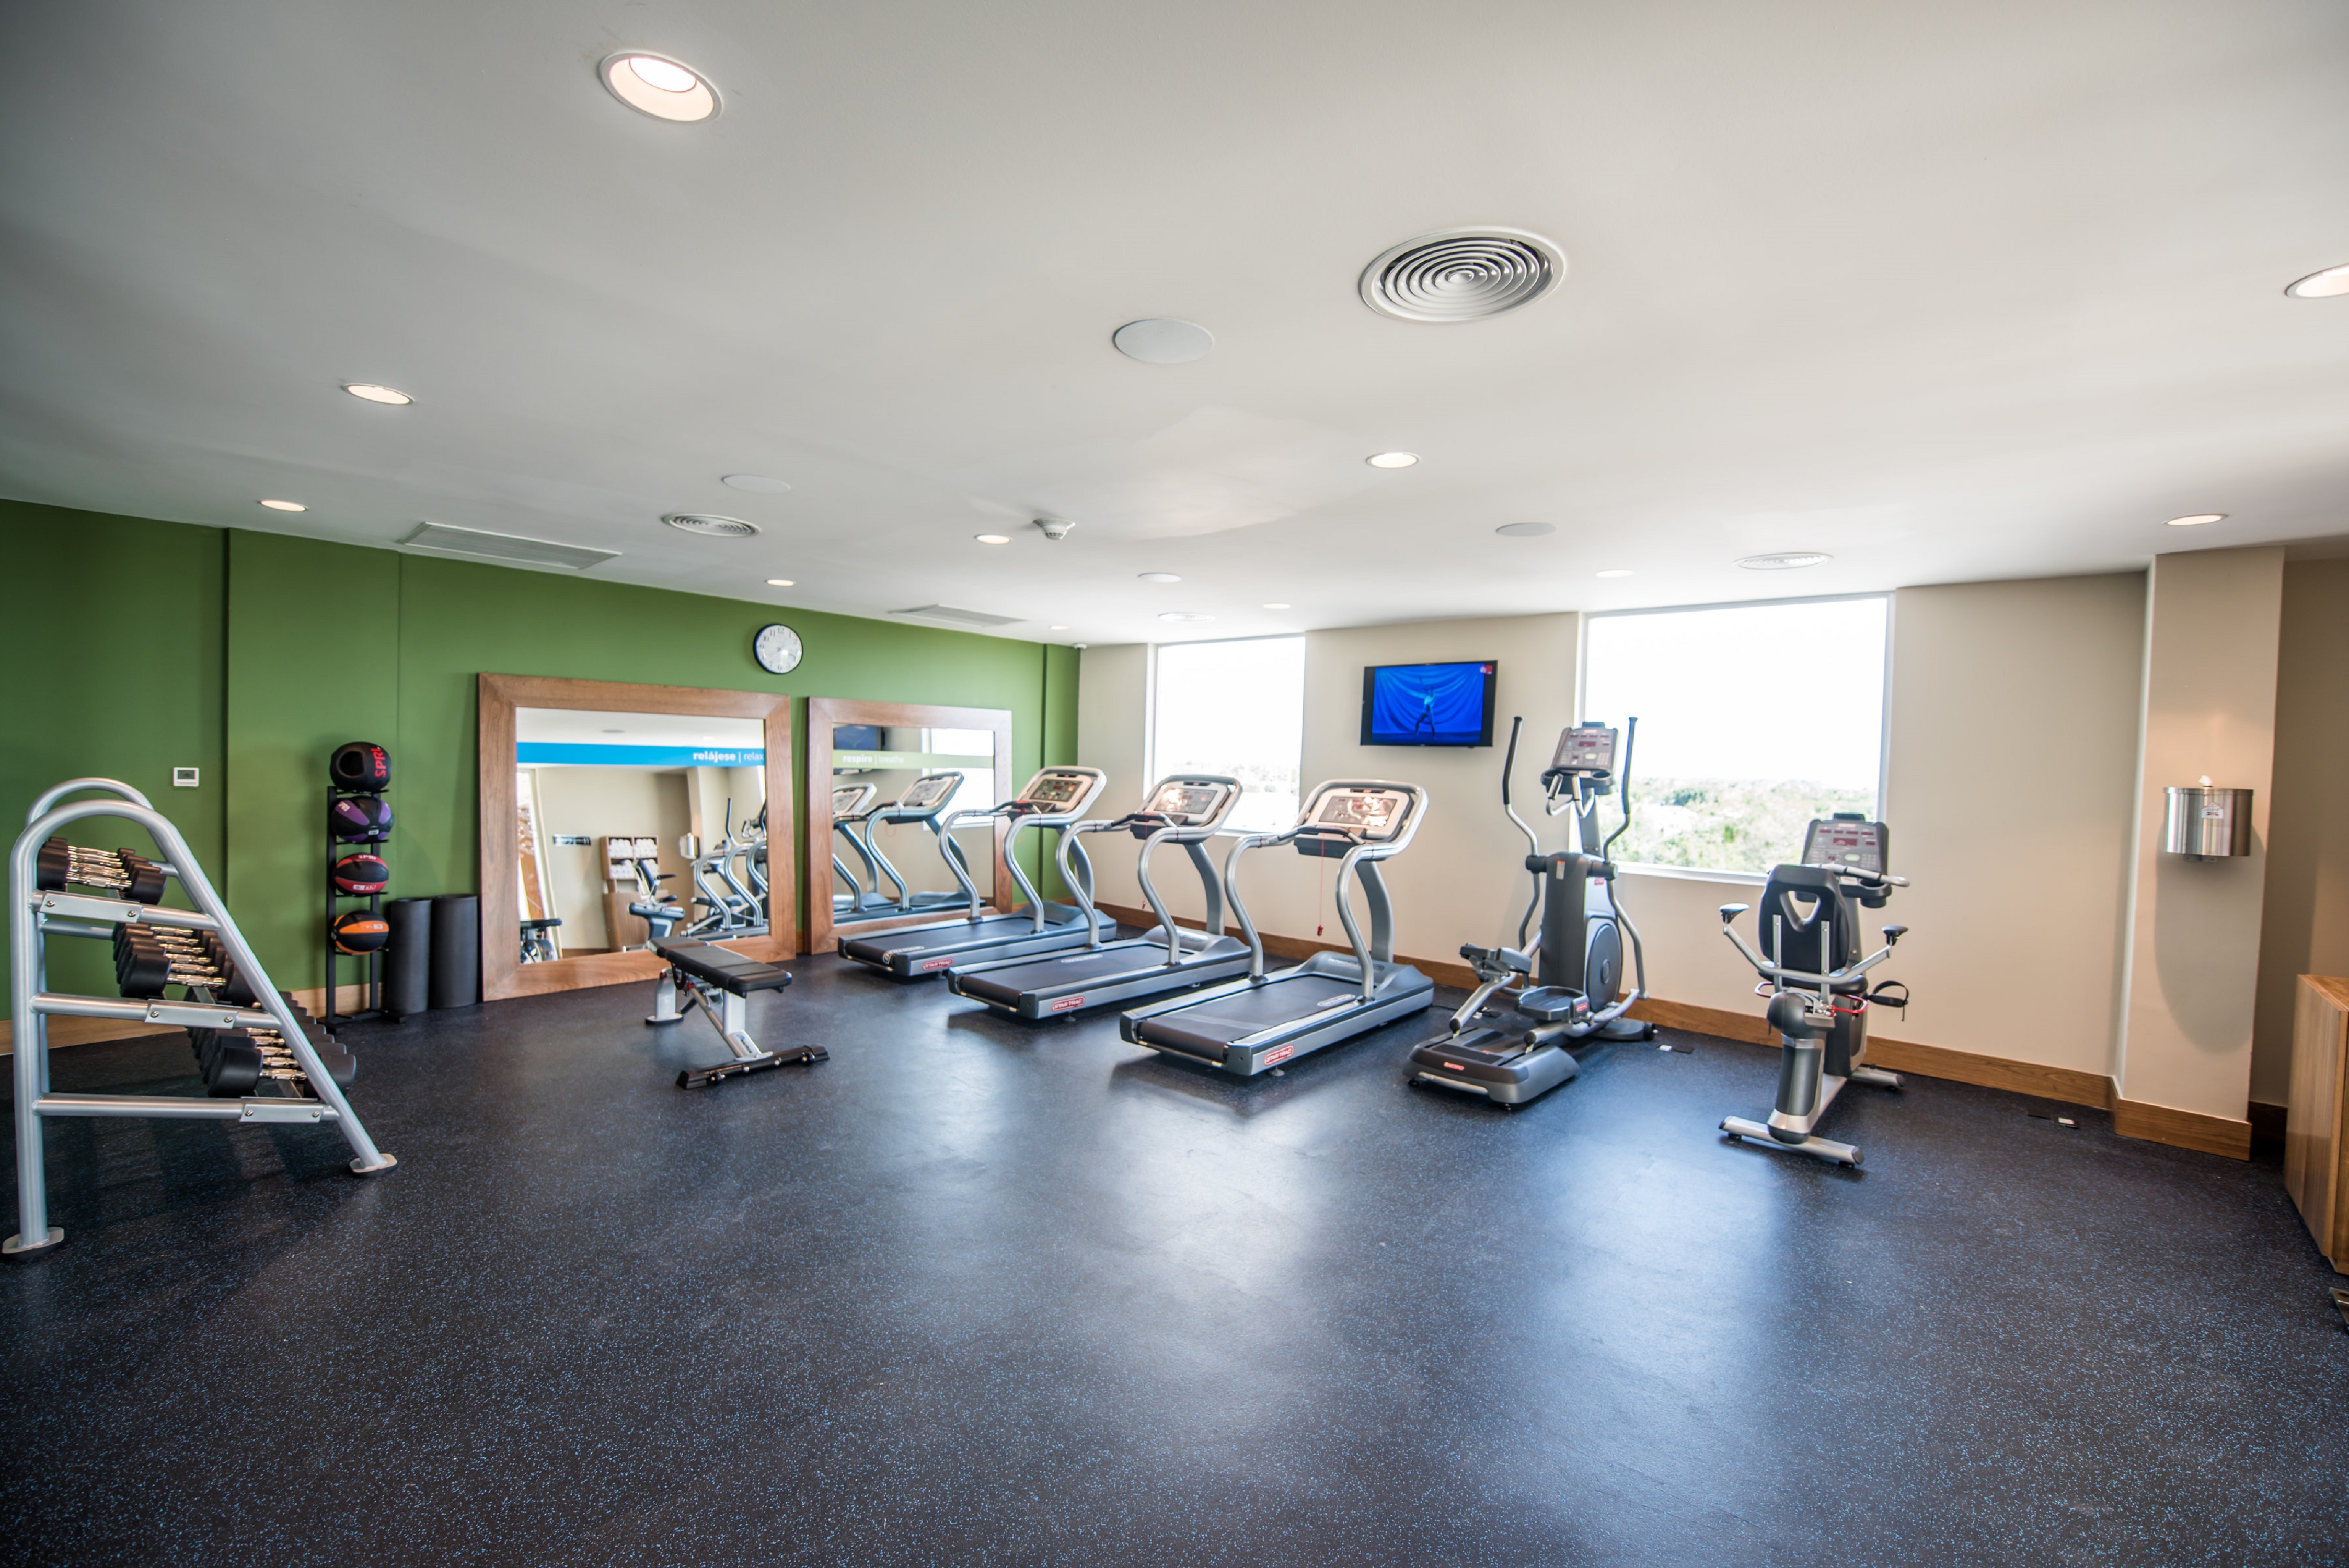 Fitness Center with Treadmills, Cross-Trainer, Cycle Machine and Dumbbell Rack